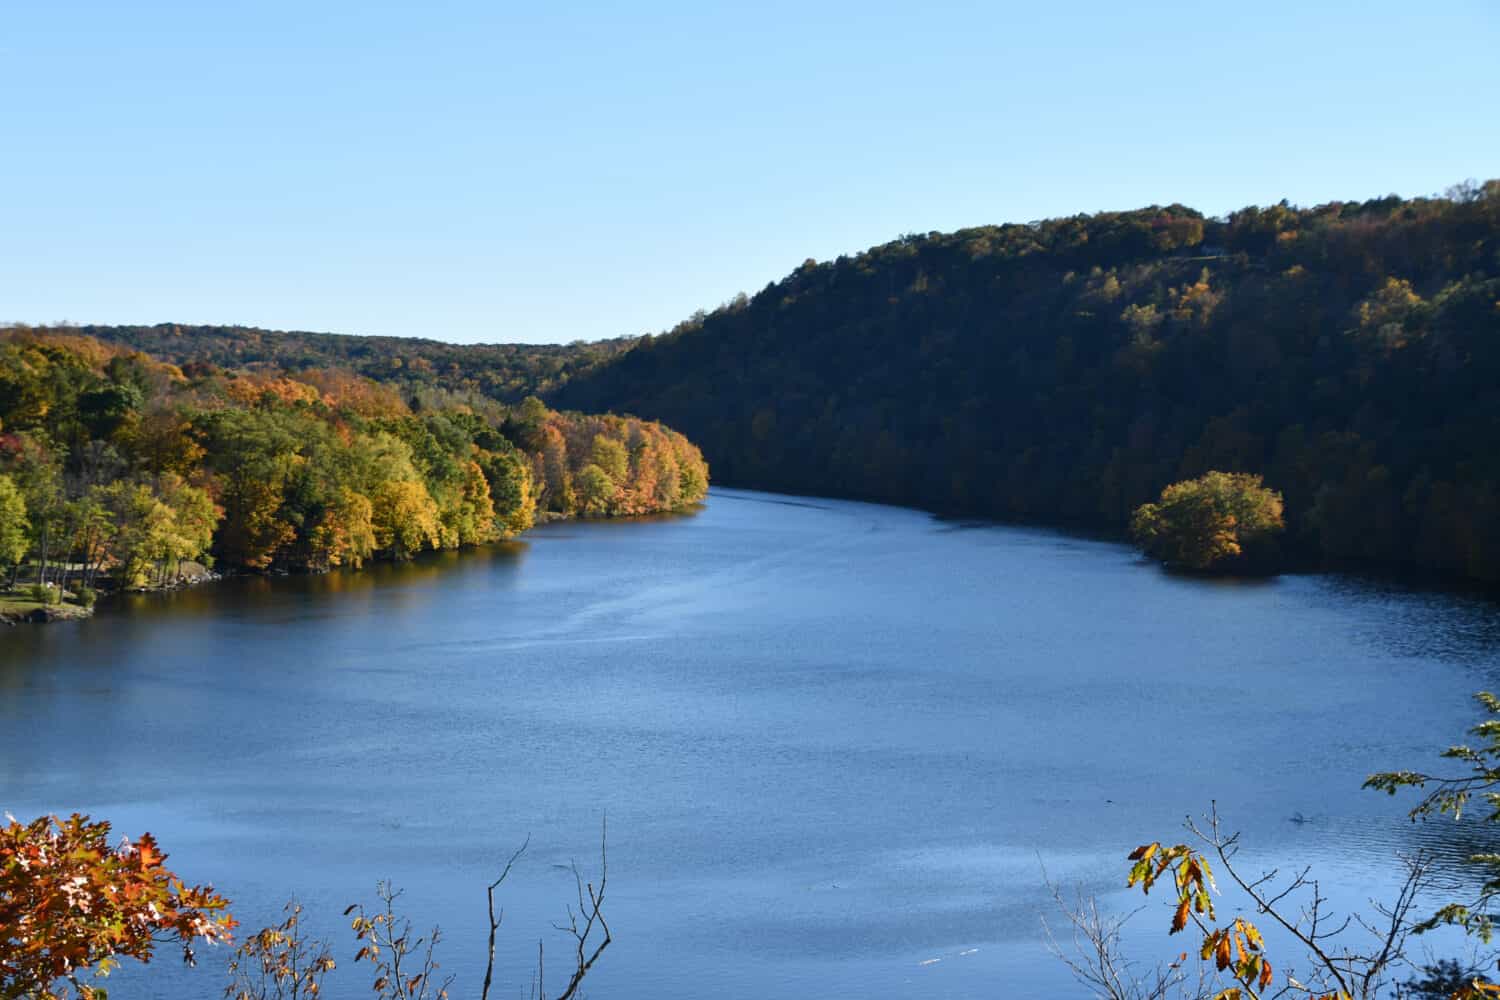 View of Lake Lillinonah from Lovers Leap State Park in New Milford, Connecticut